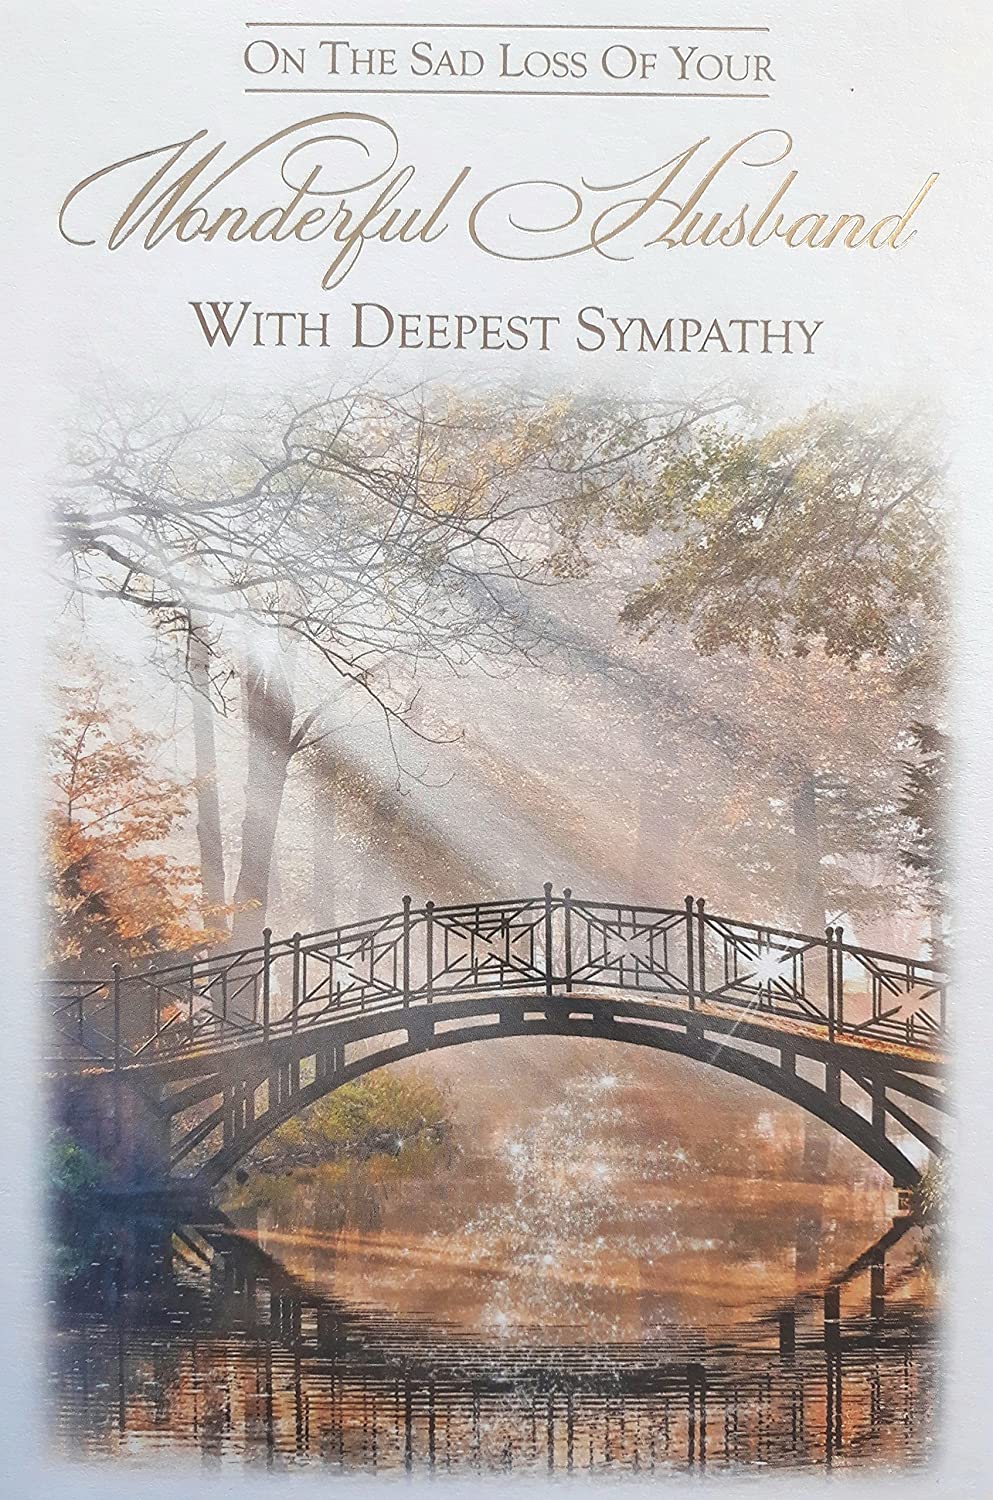 Husband Sympathy Card - The Connection Between God and Man